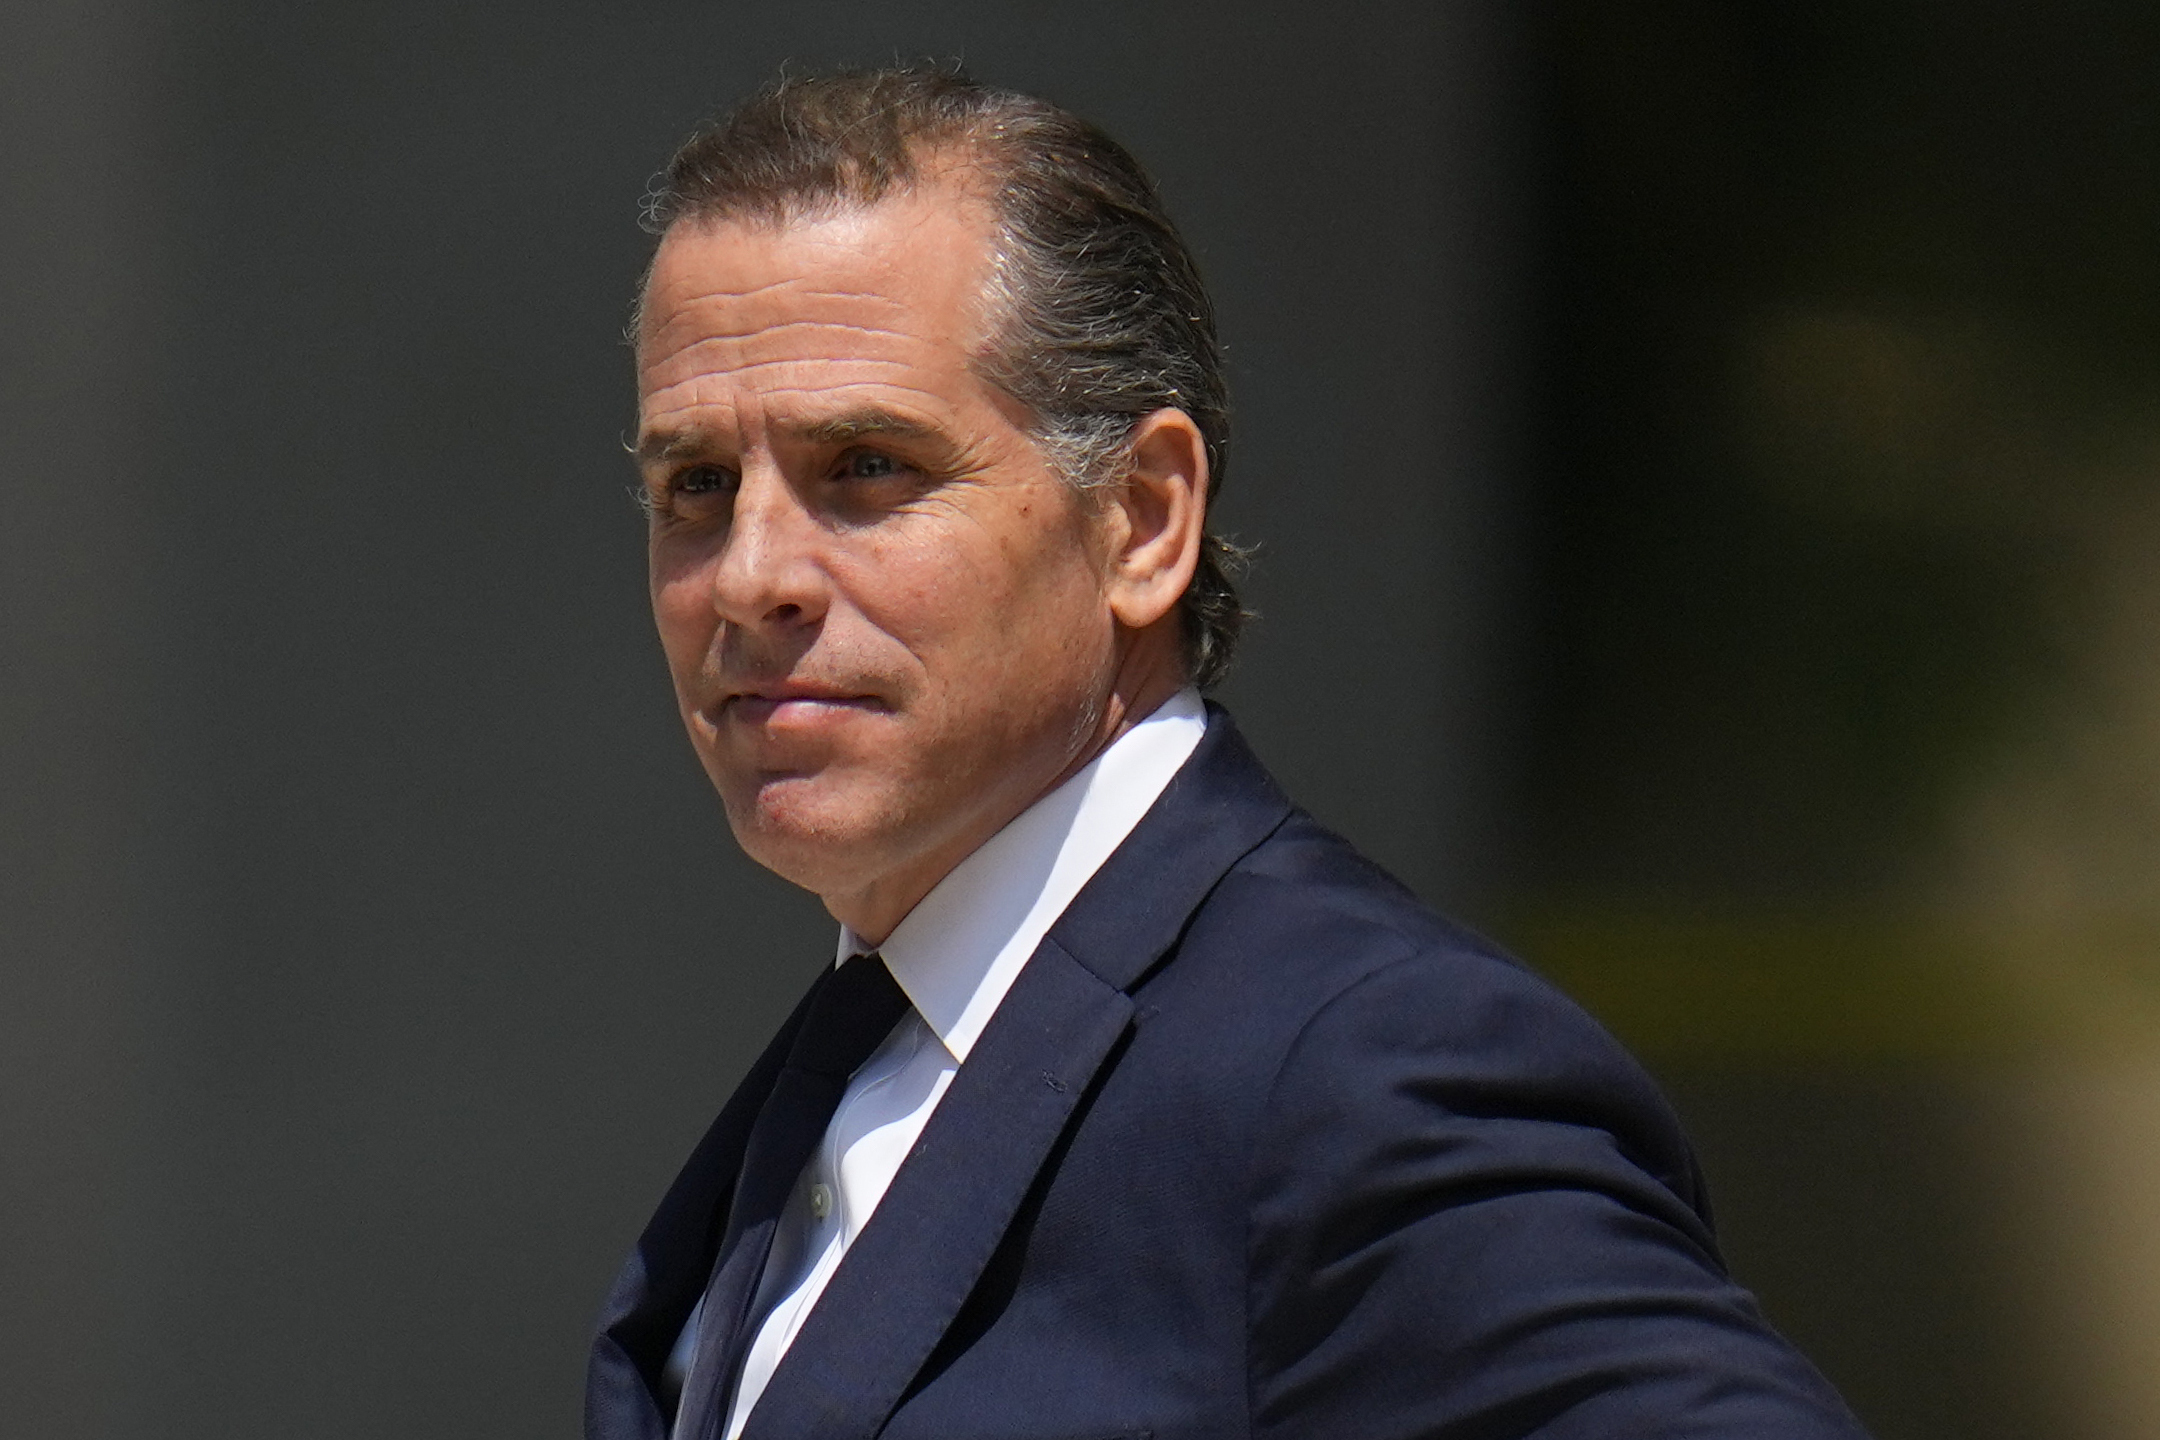 Hunter Biden leaves the courthouse in Wilmington, Delaware,on July 26.